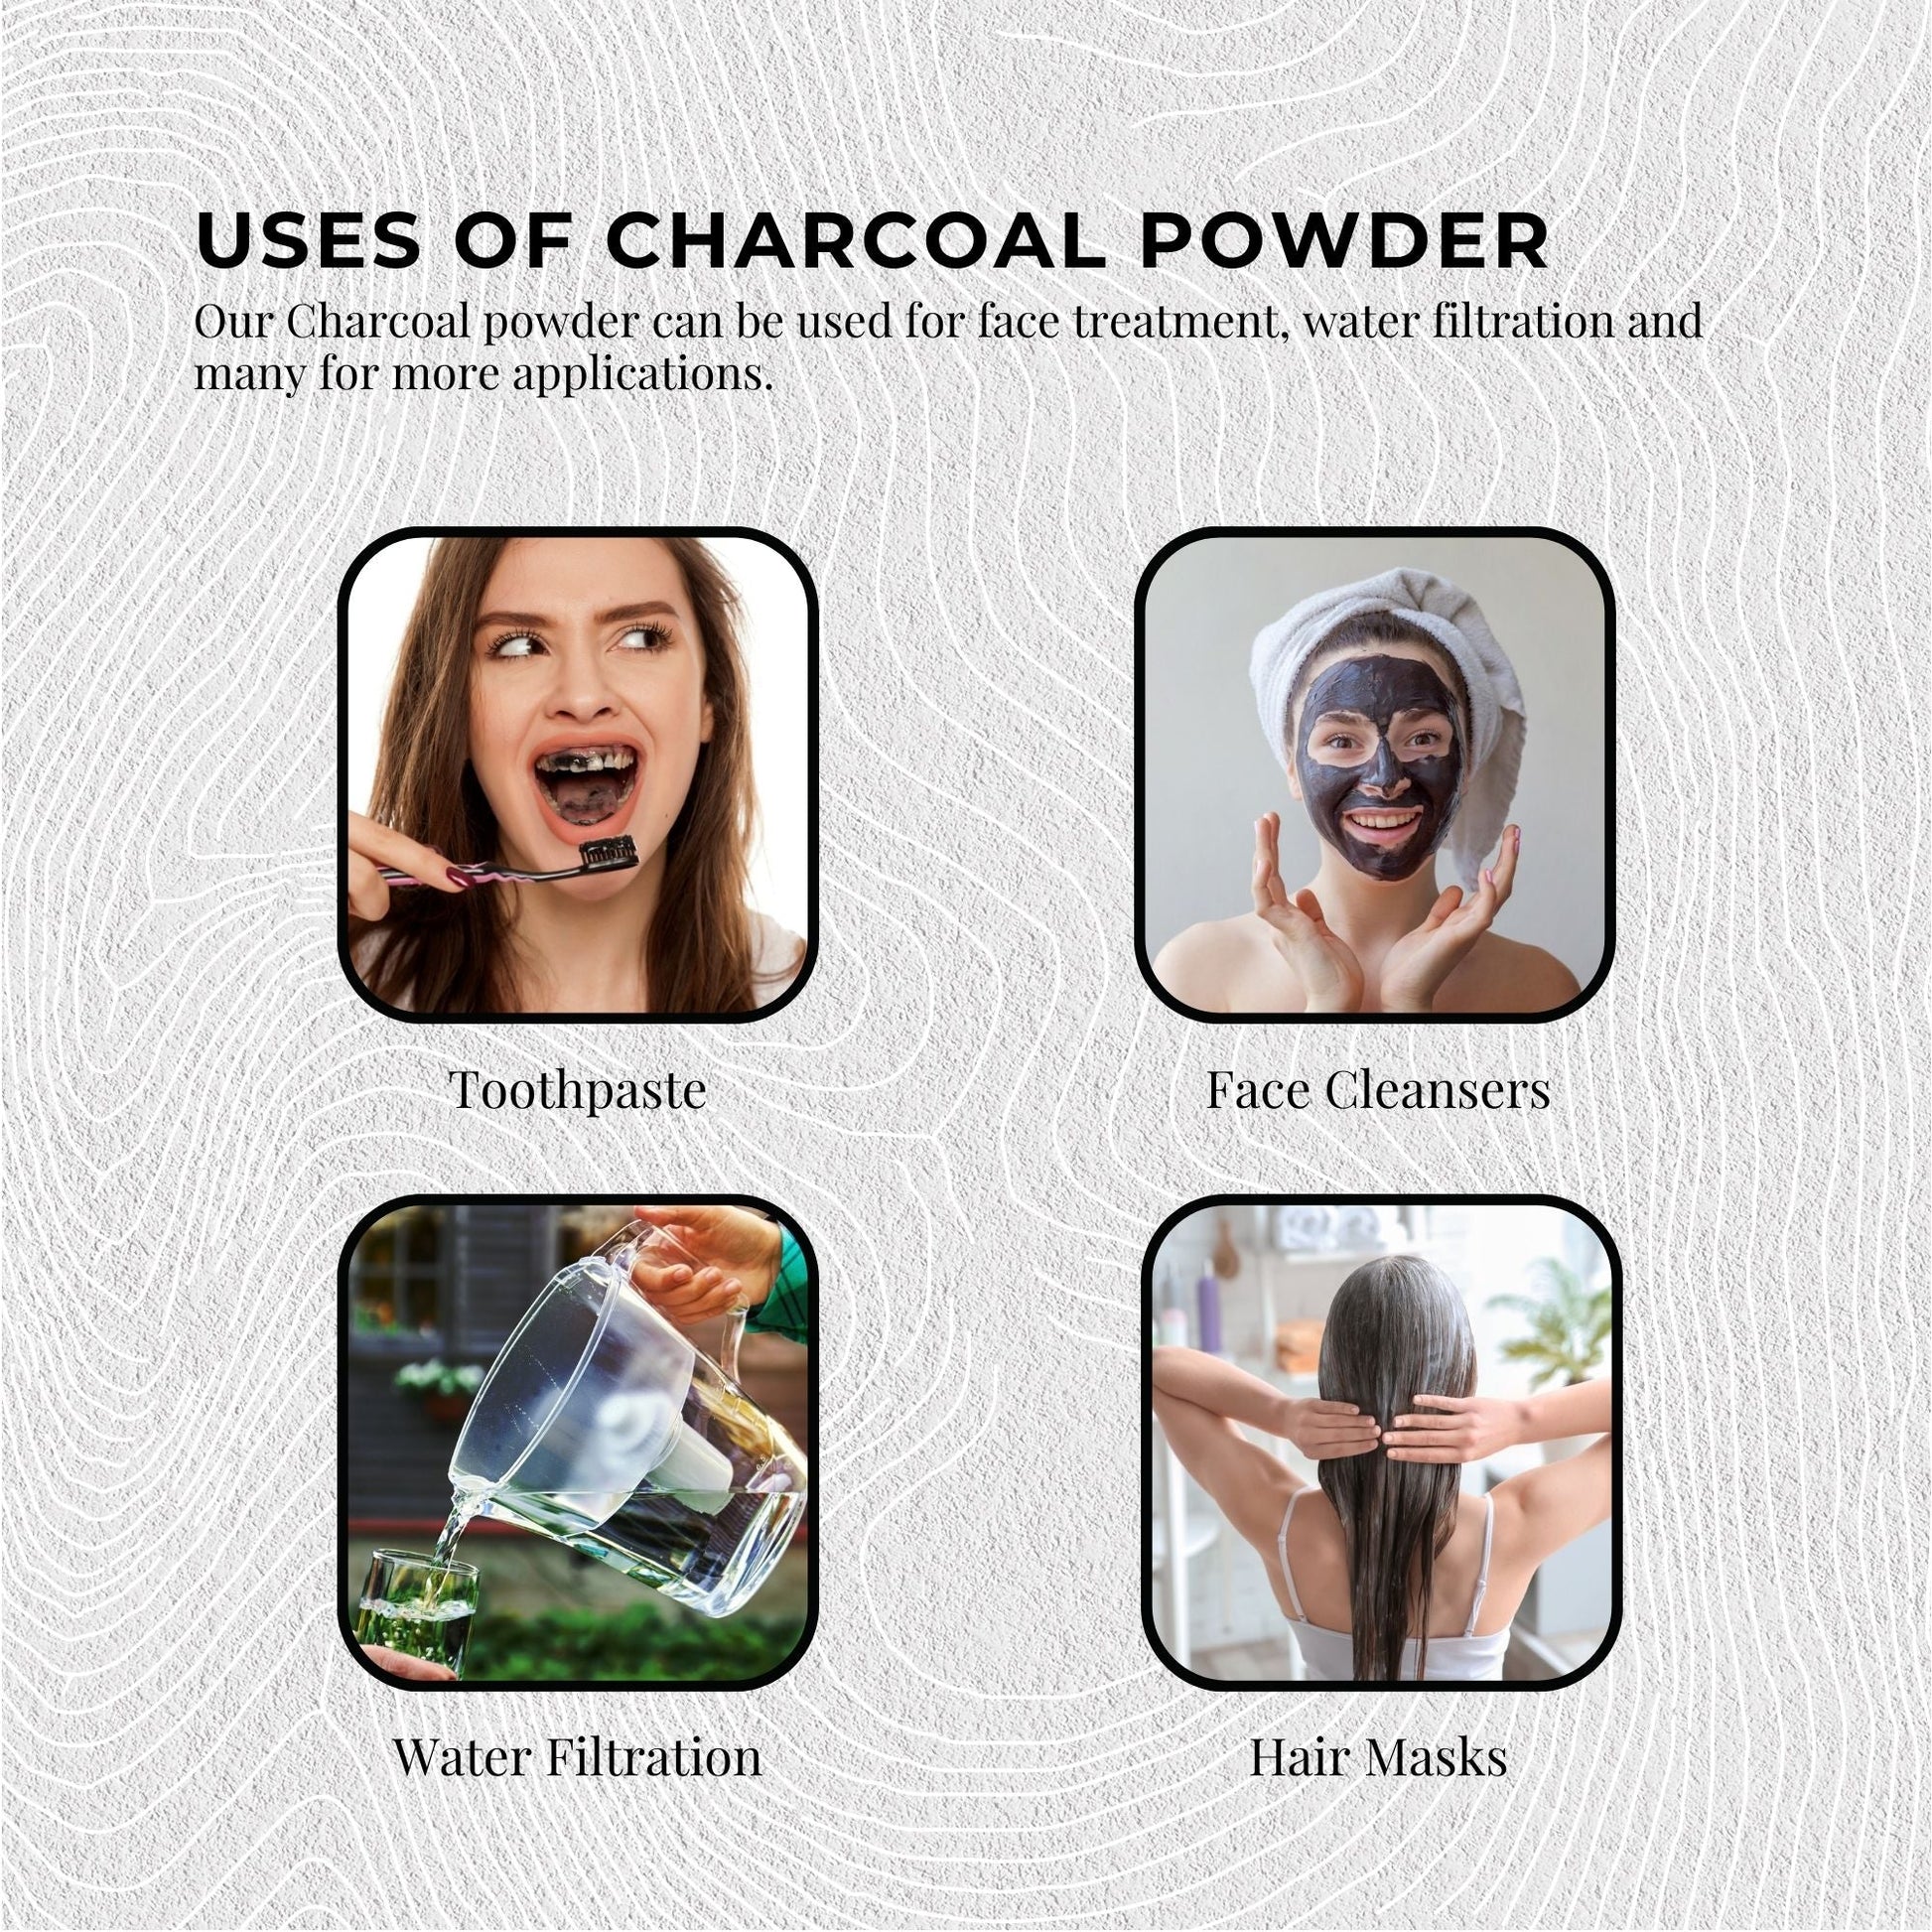 10Kg Activated Carbon Powder Coconut Charcoal - Teeth Whitening + Skin